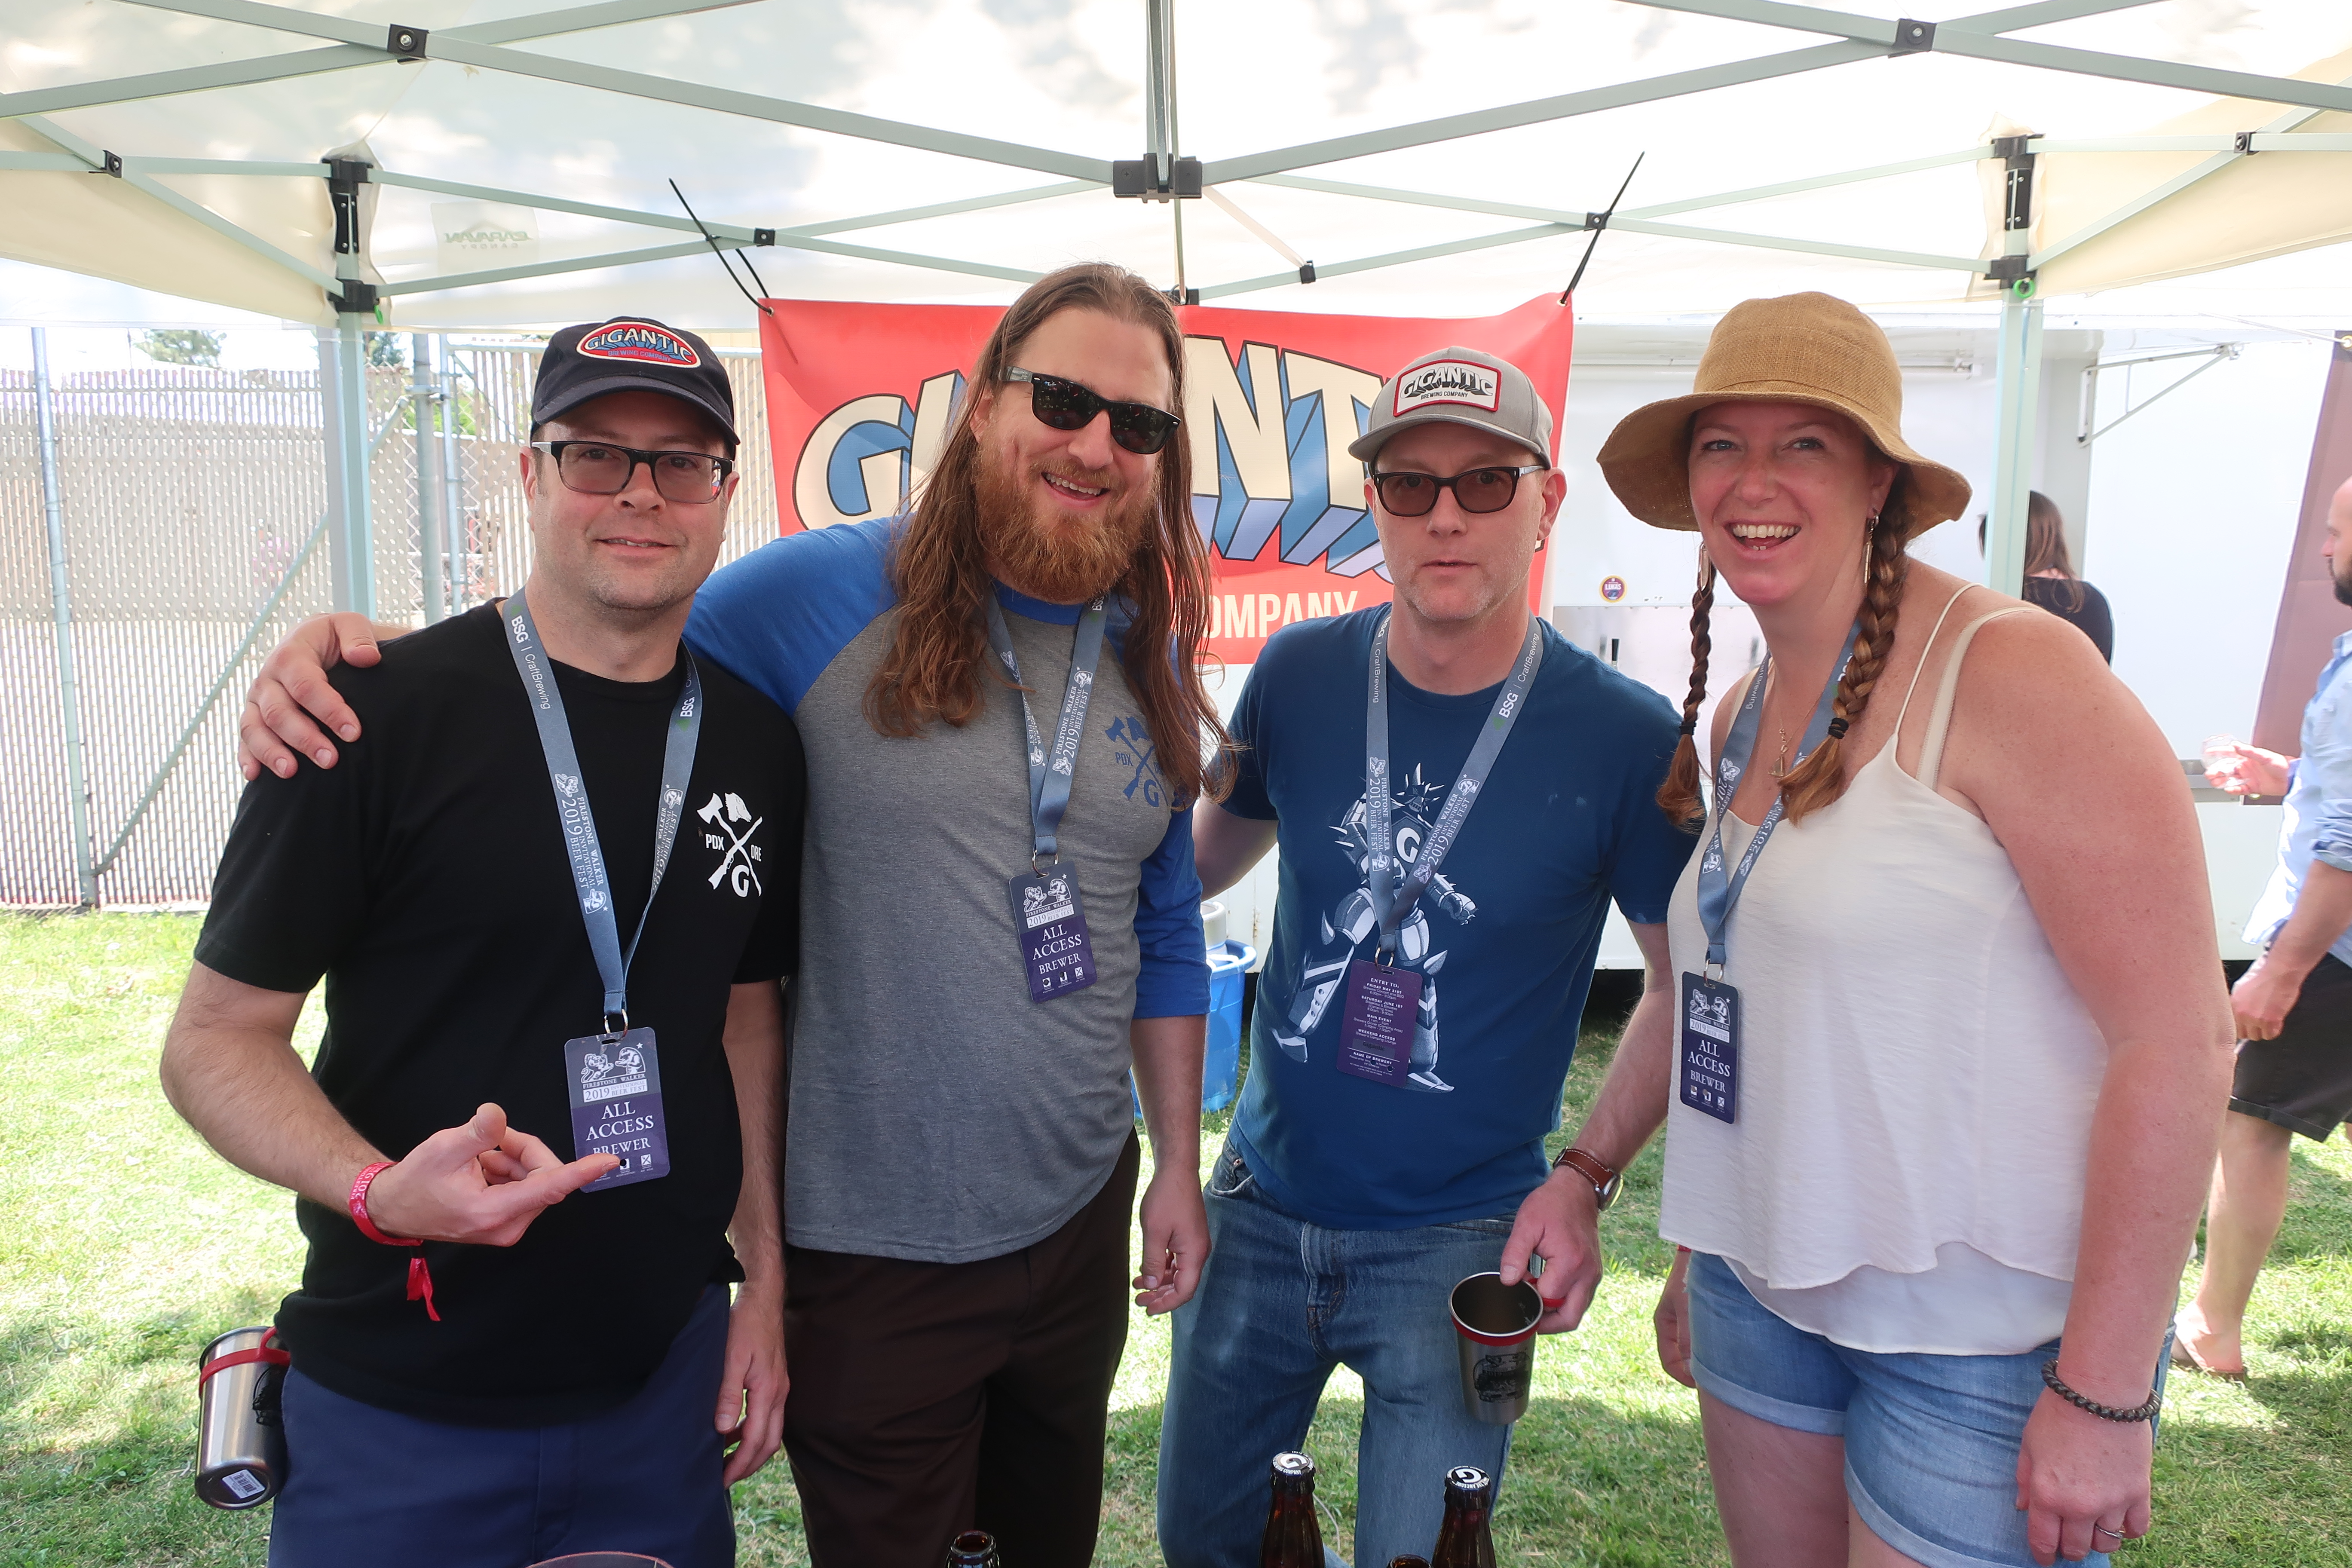 Gigantic Brewing made a return visit to the 2019 Firestone Walker Invitational Beer Fest in Paso Robles, California.